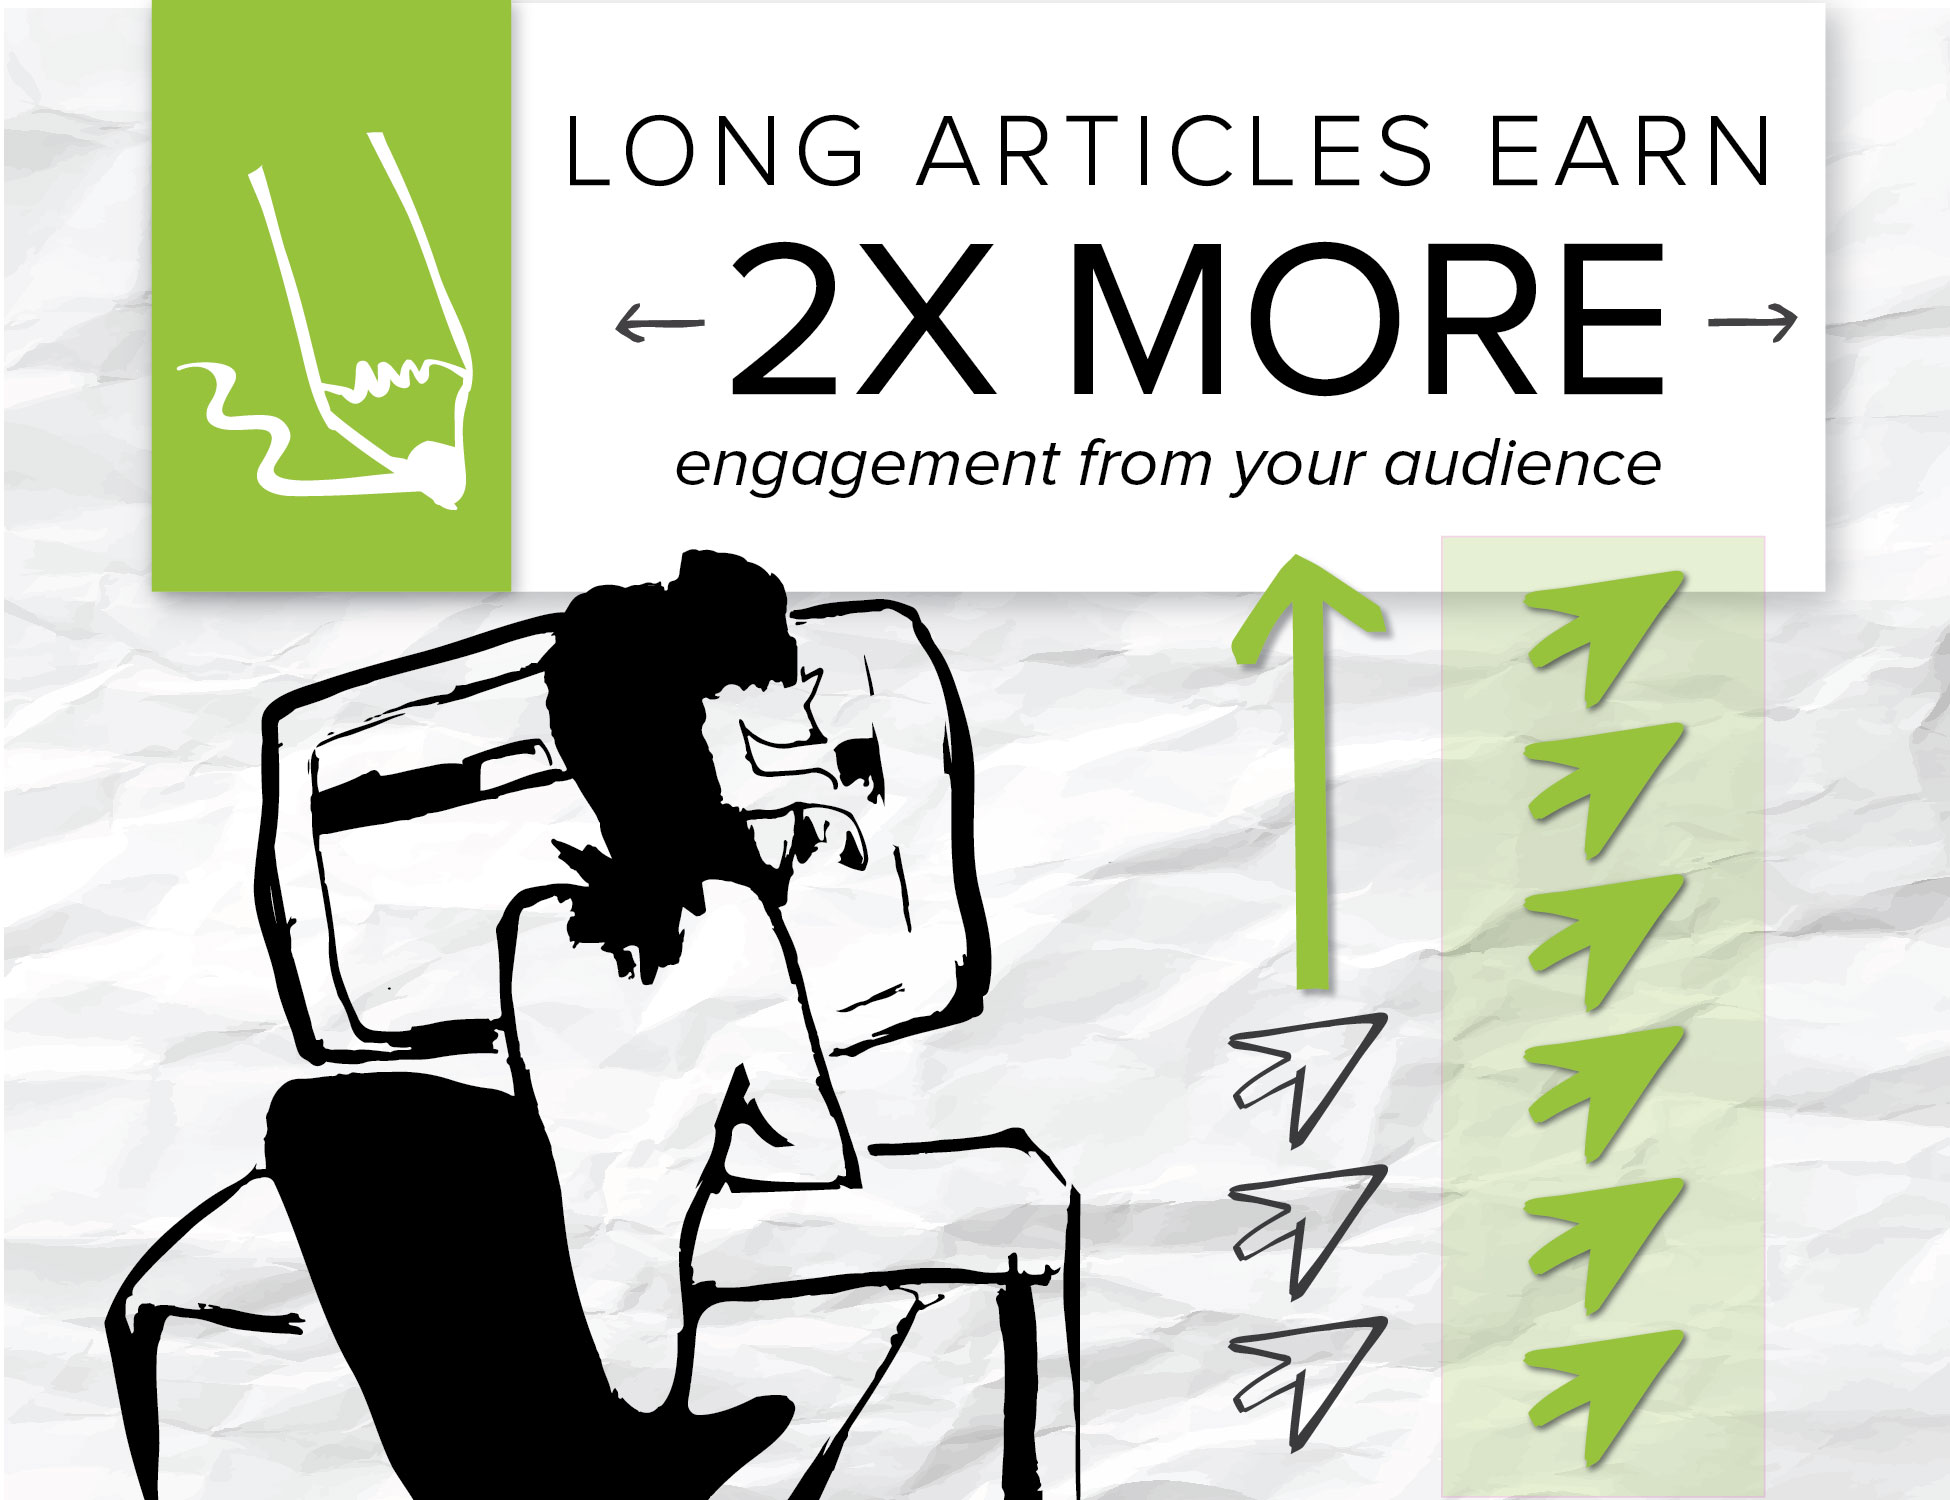 One client doubled its engagement metrics with a refined content marketing strategy.